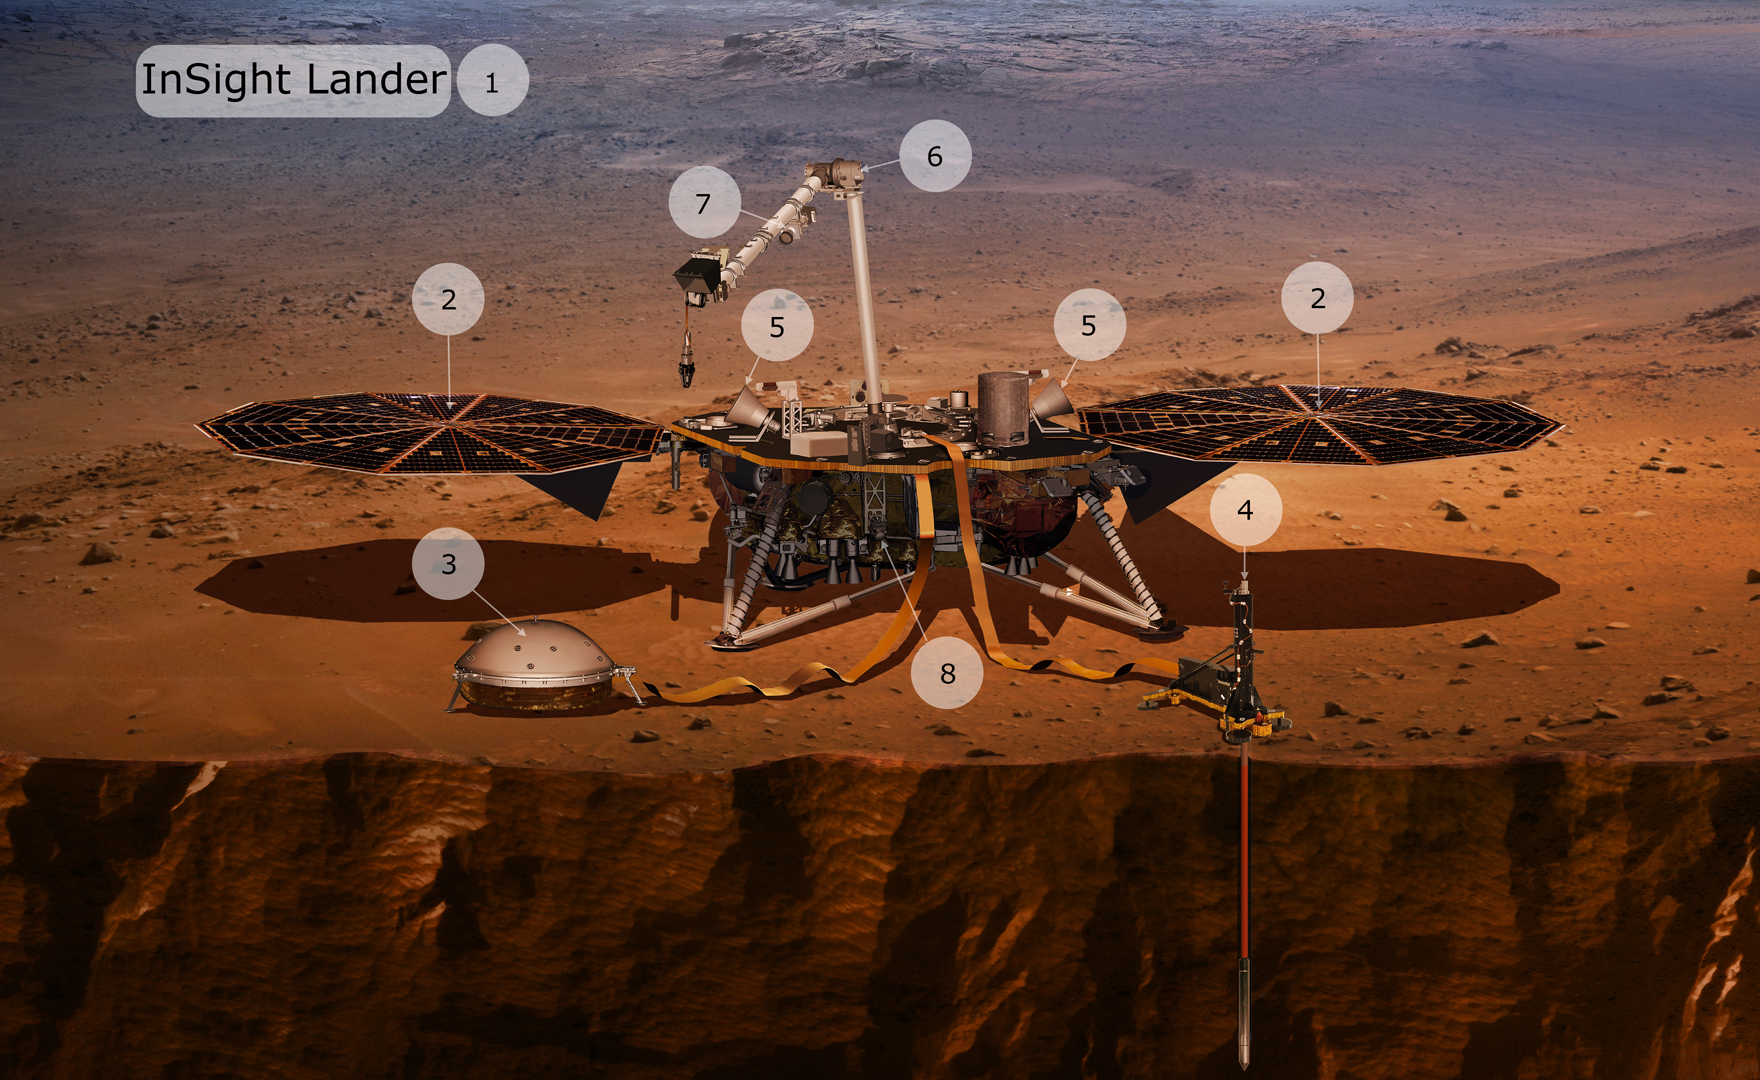 Explore the InSight lander: click on the numbers